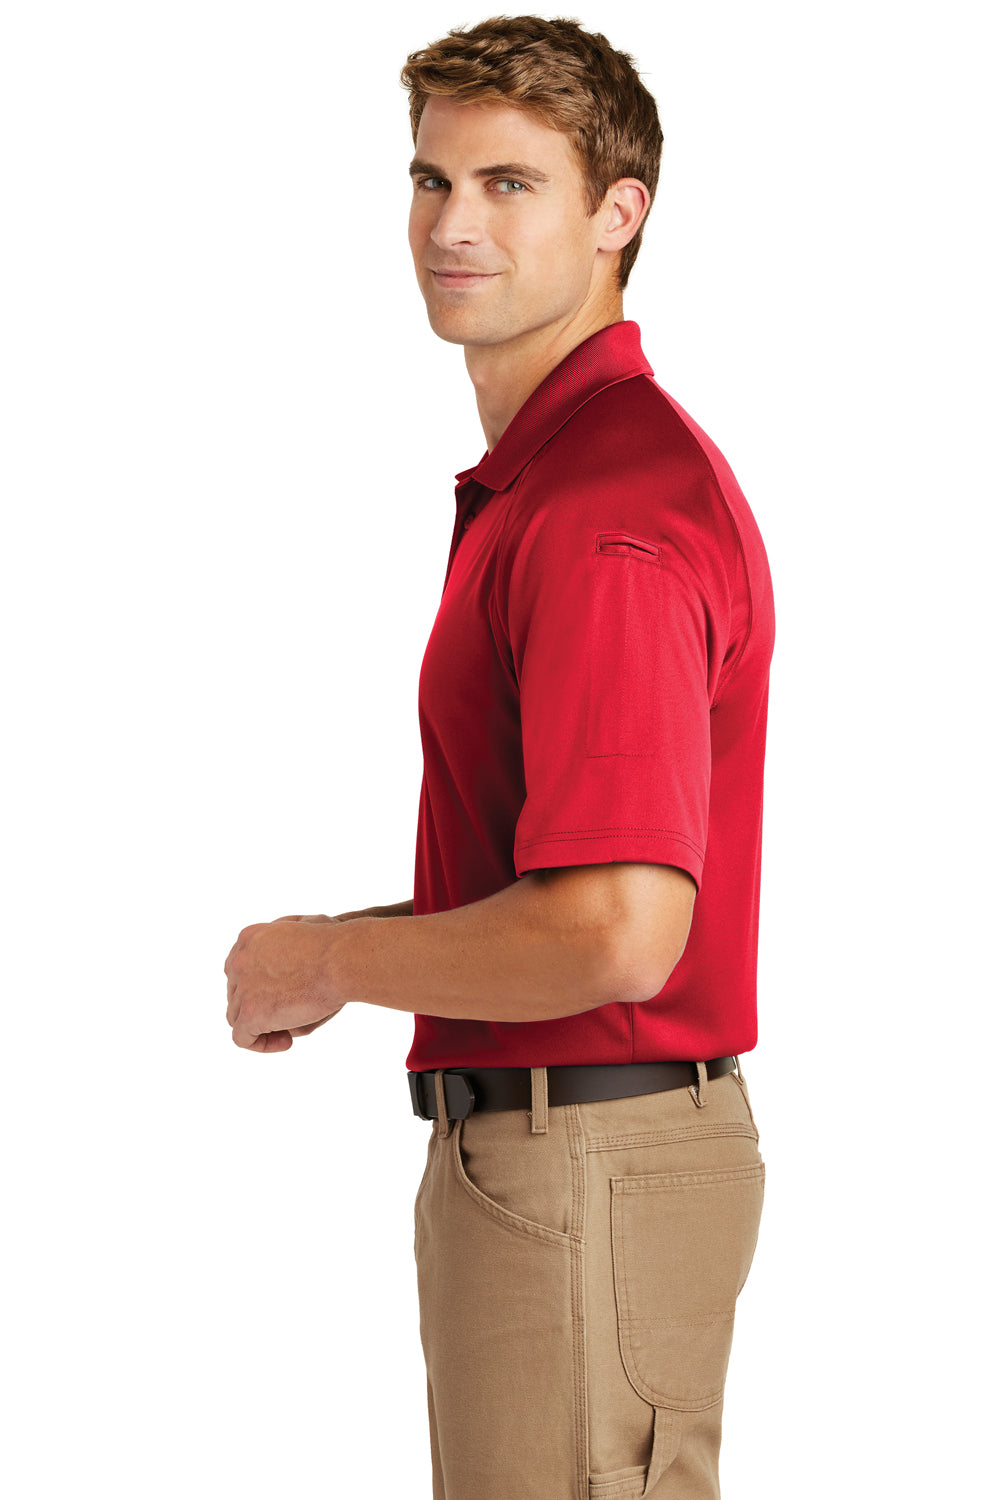 CornerStone CS410 Mens Select Tactical Moisture Wicking Short Sleeve Polo Shirt Red Side